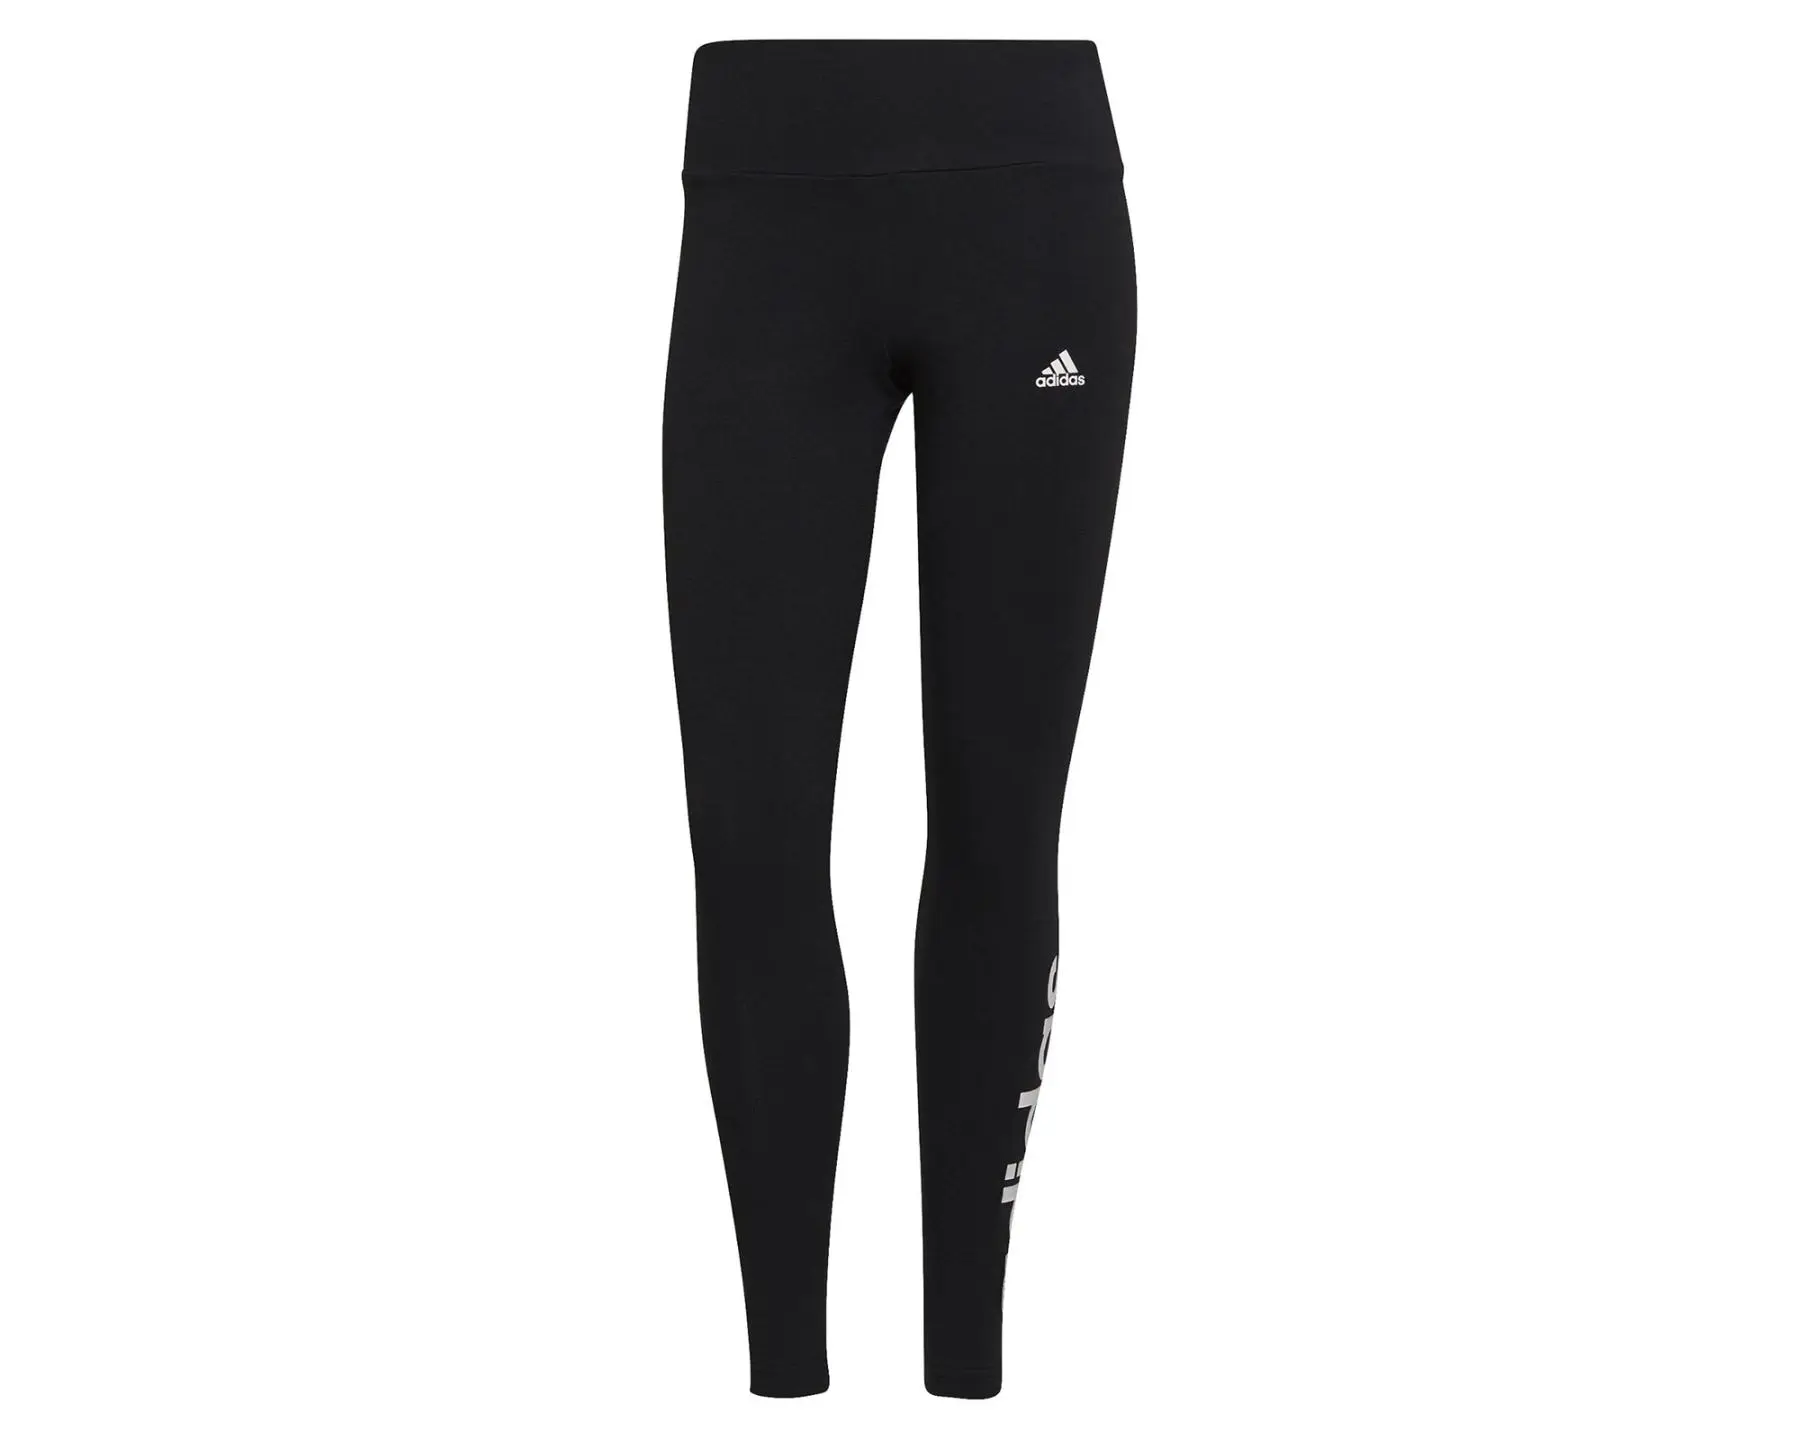 Adidas Original Women's Training Tights Black Color with High Cotton Content and High Waist Extra Comfort Sport Walking Yoga